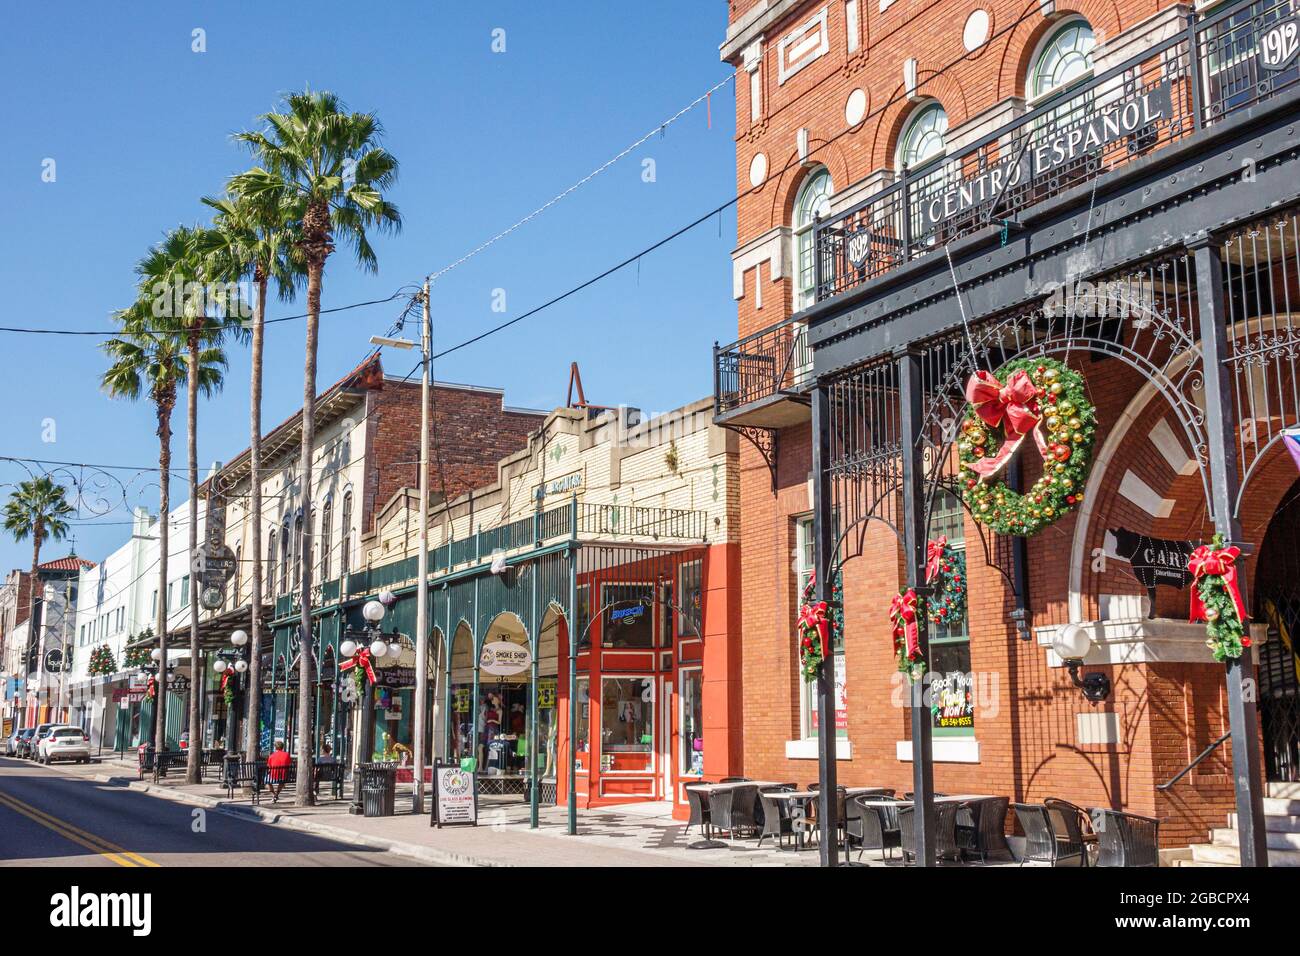 Florida Tampa Ybor City,historic neighborhood 7th Avenue street scene businesses stores,shopping district buildings, Stock Photo